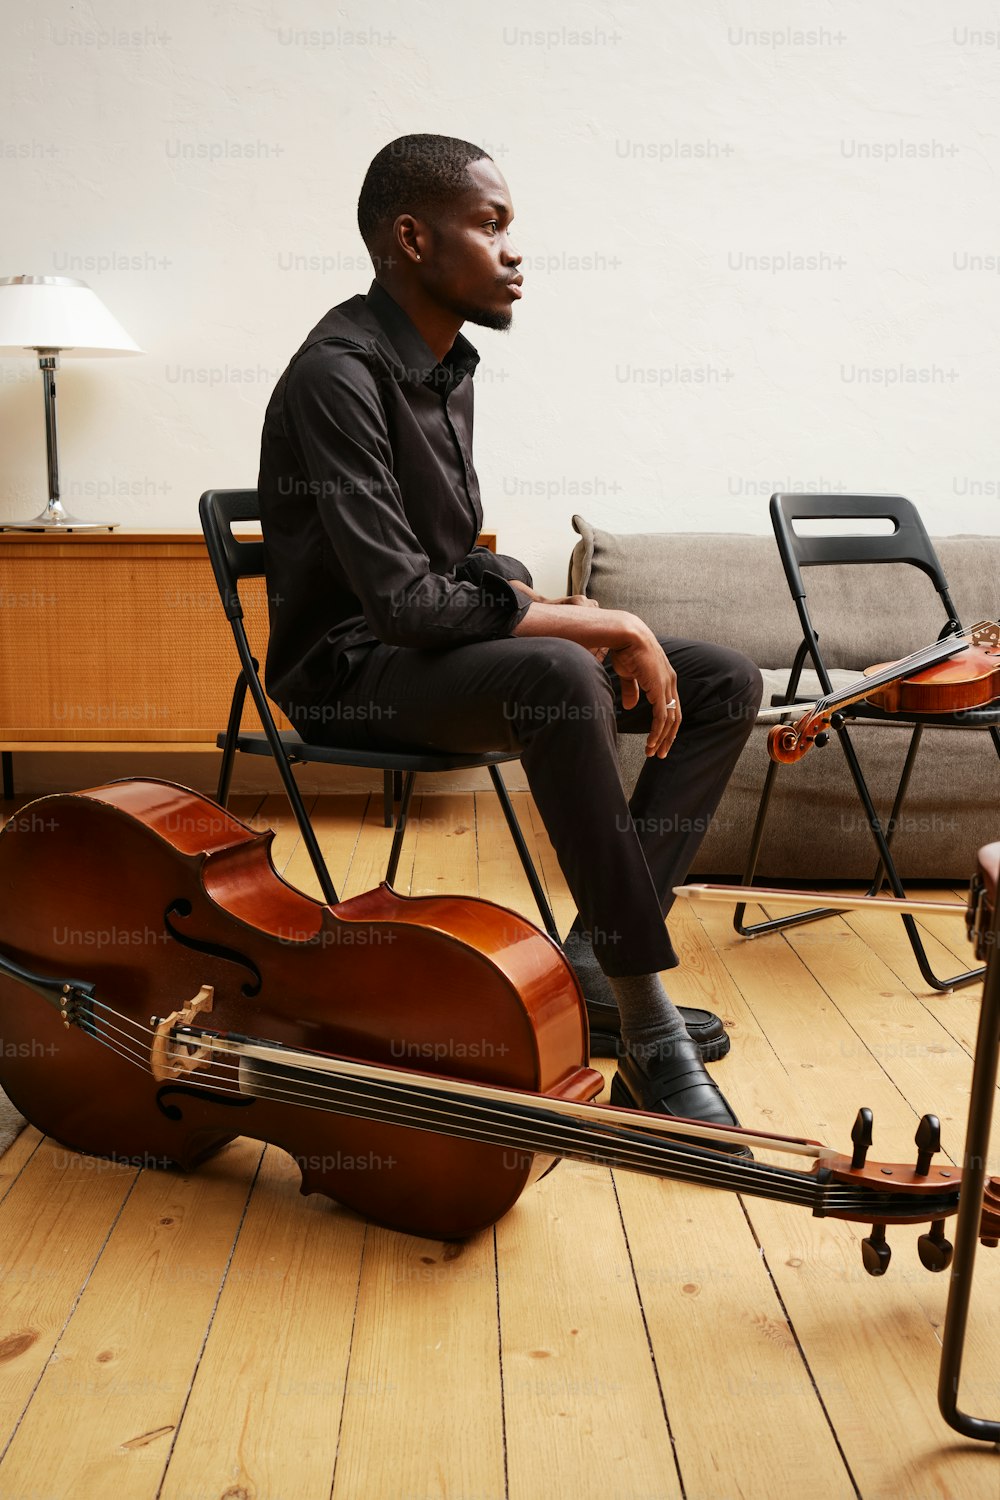 a man sitting on a chair next to a violin